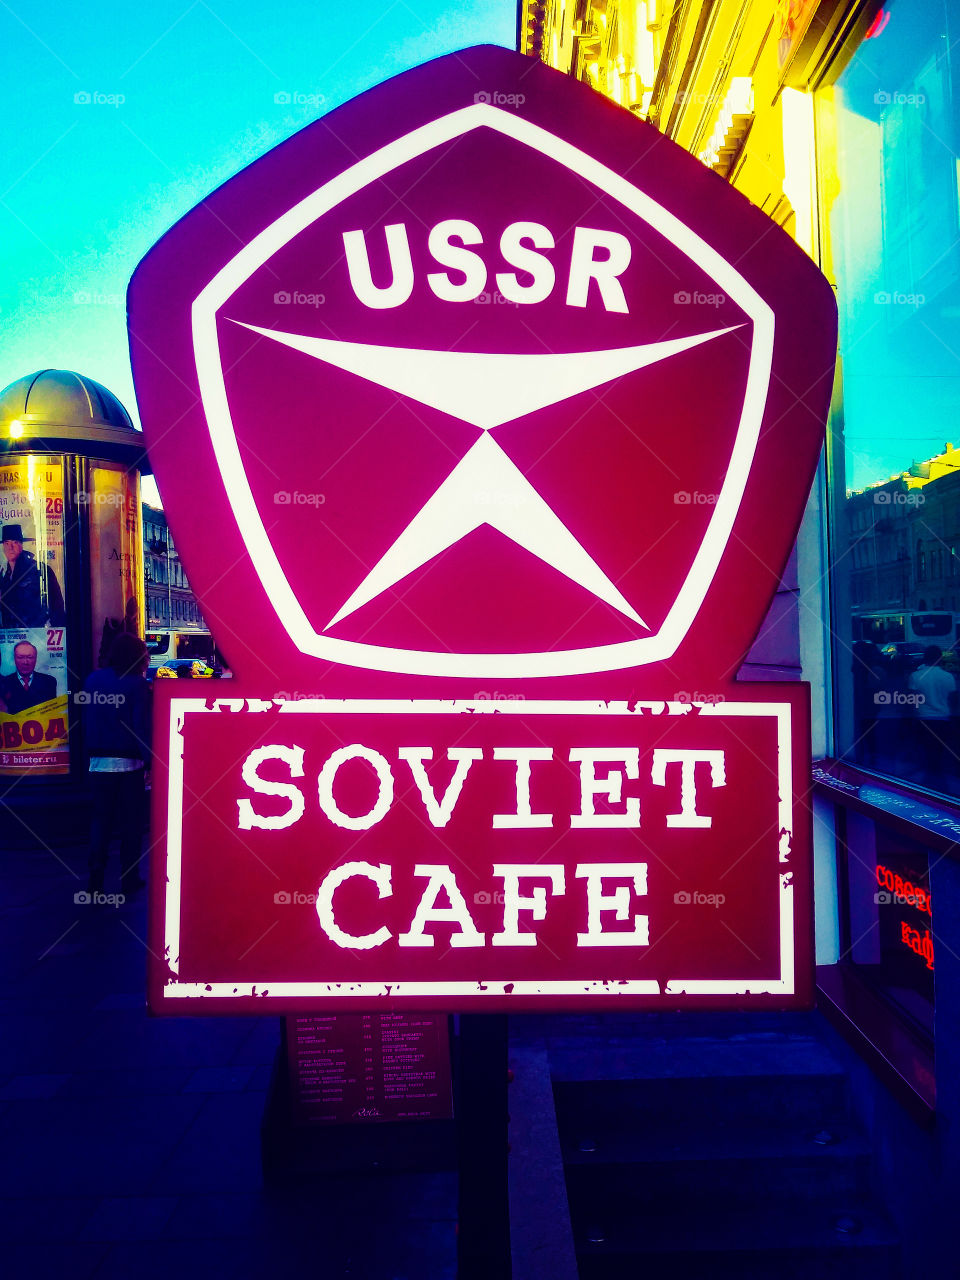 Saint-Petersburg, Russia. Cafe from USSR😎👻